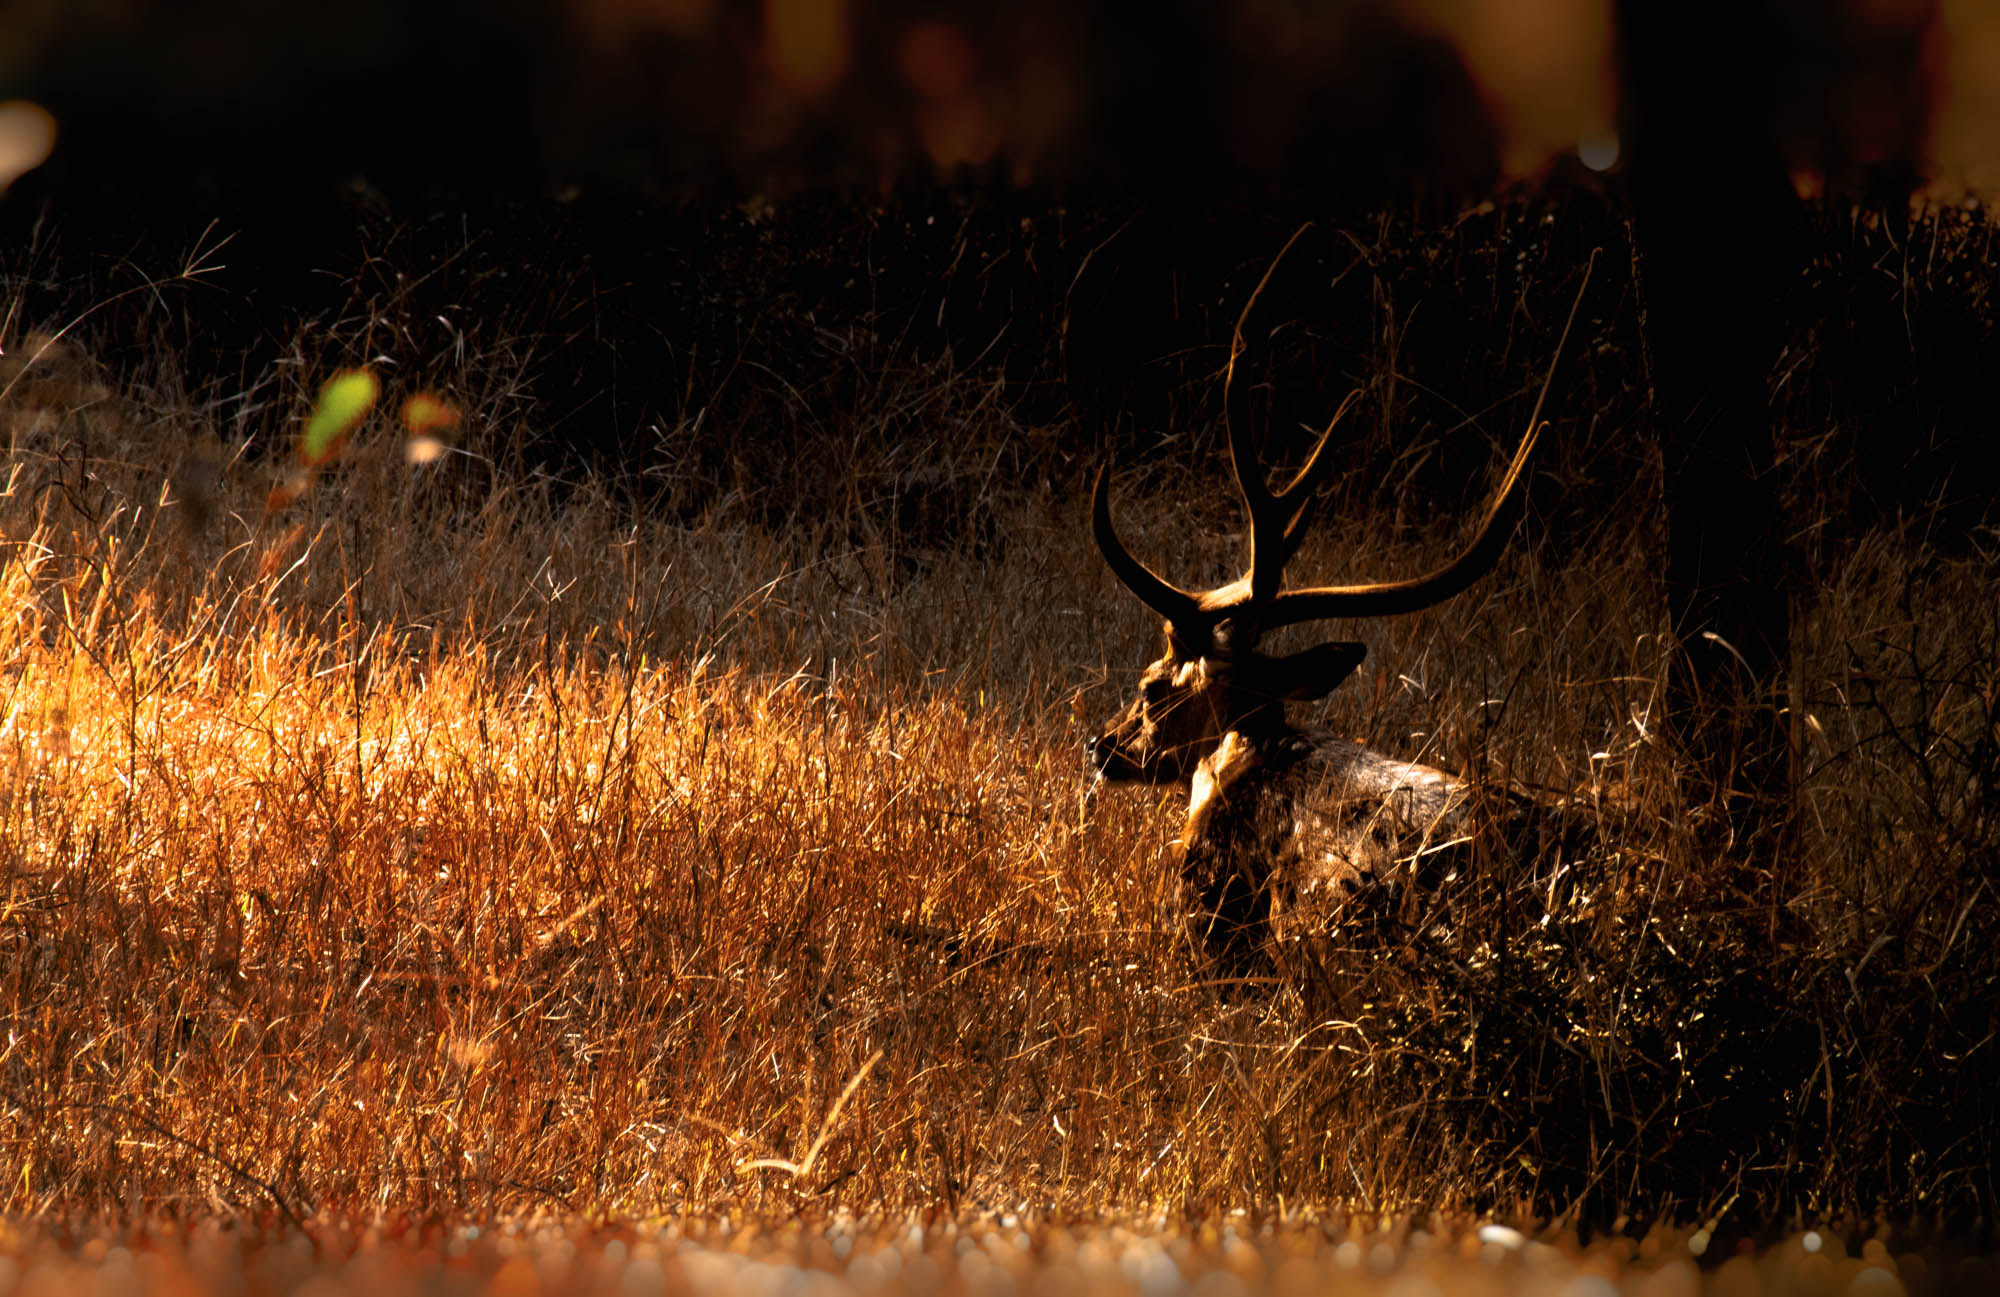 Nikon D5200 sample photo. Stag in the light photography